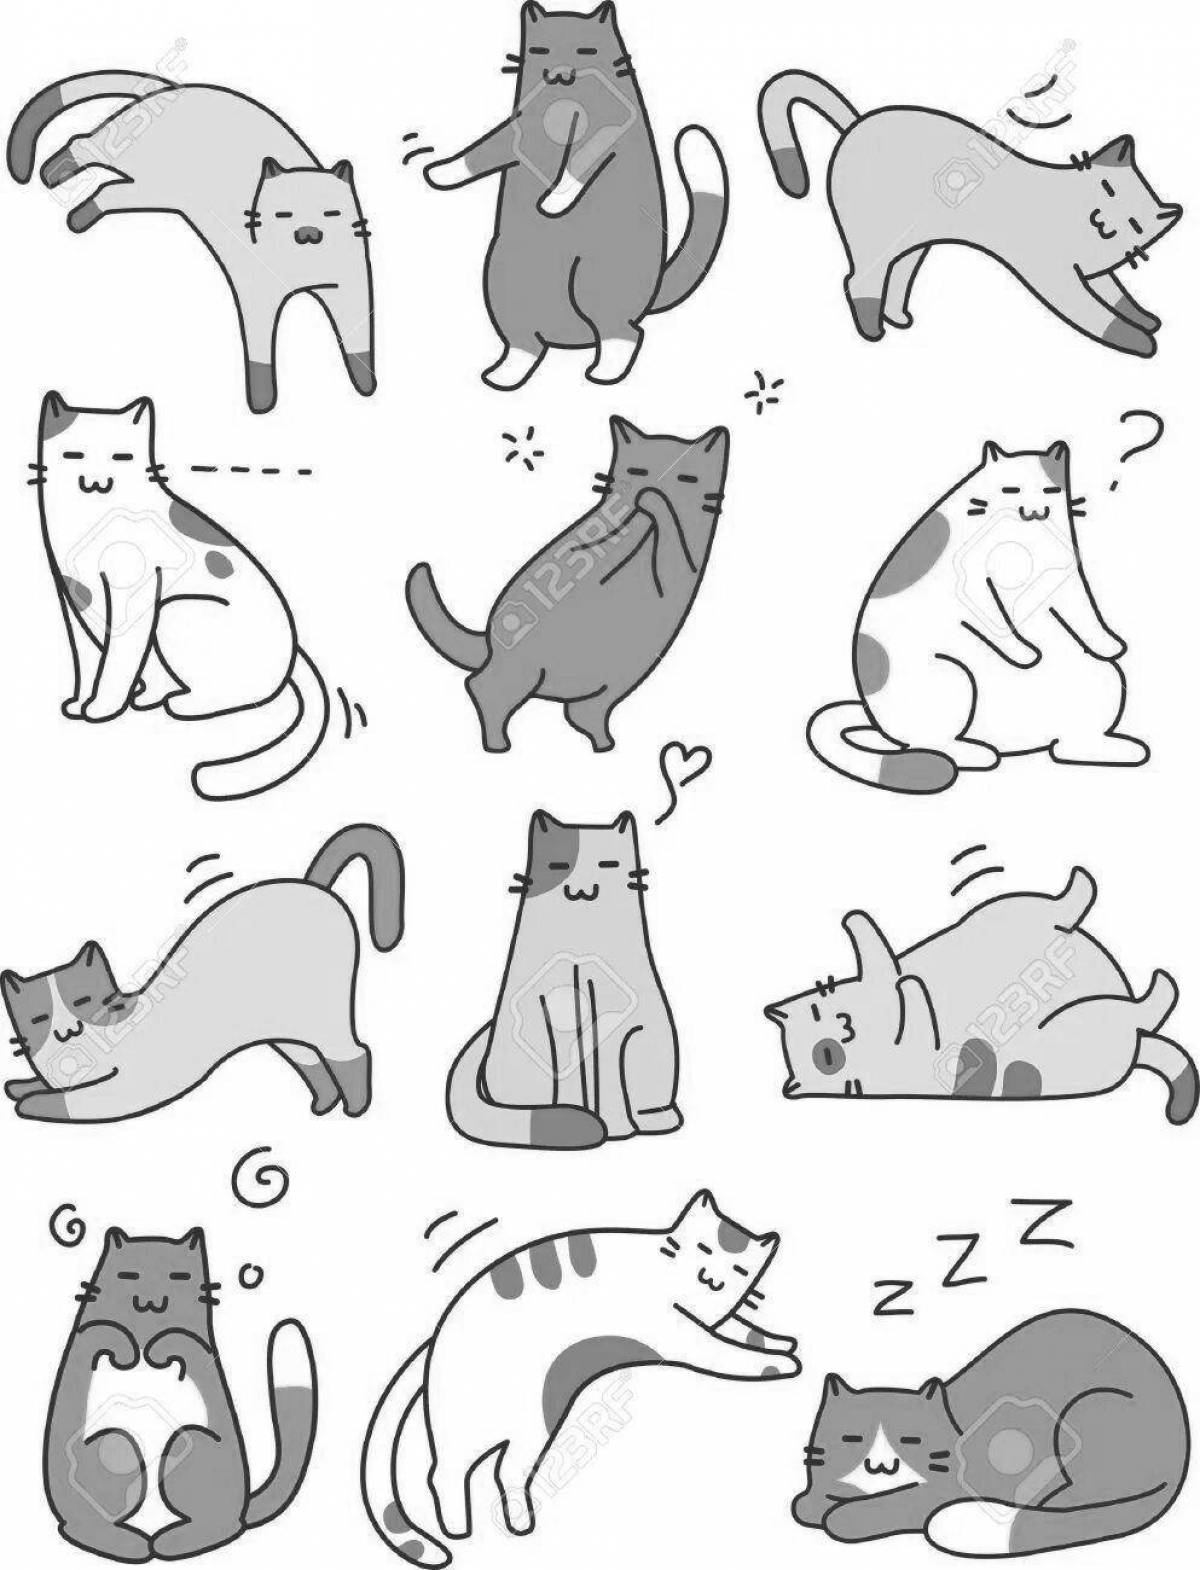 Live cat coloring pages